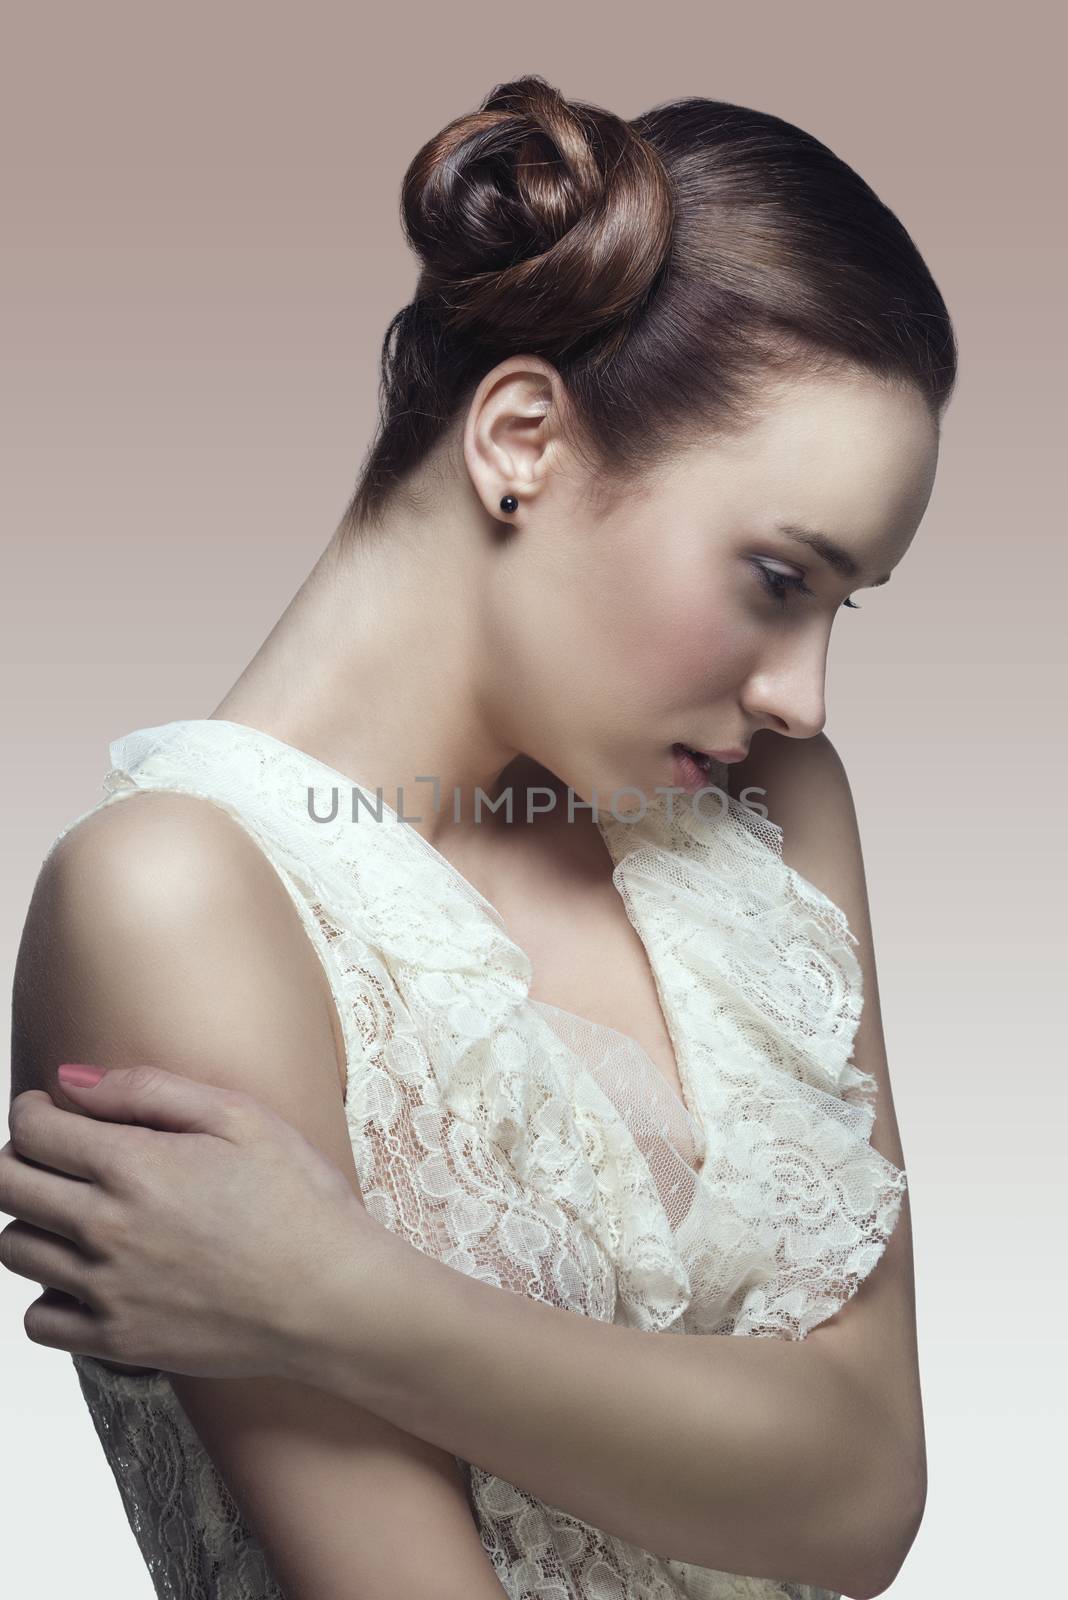 porttrait of pretty brunette girl with elegant creative hair-style in romantic pose wearing white lace shirt